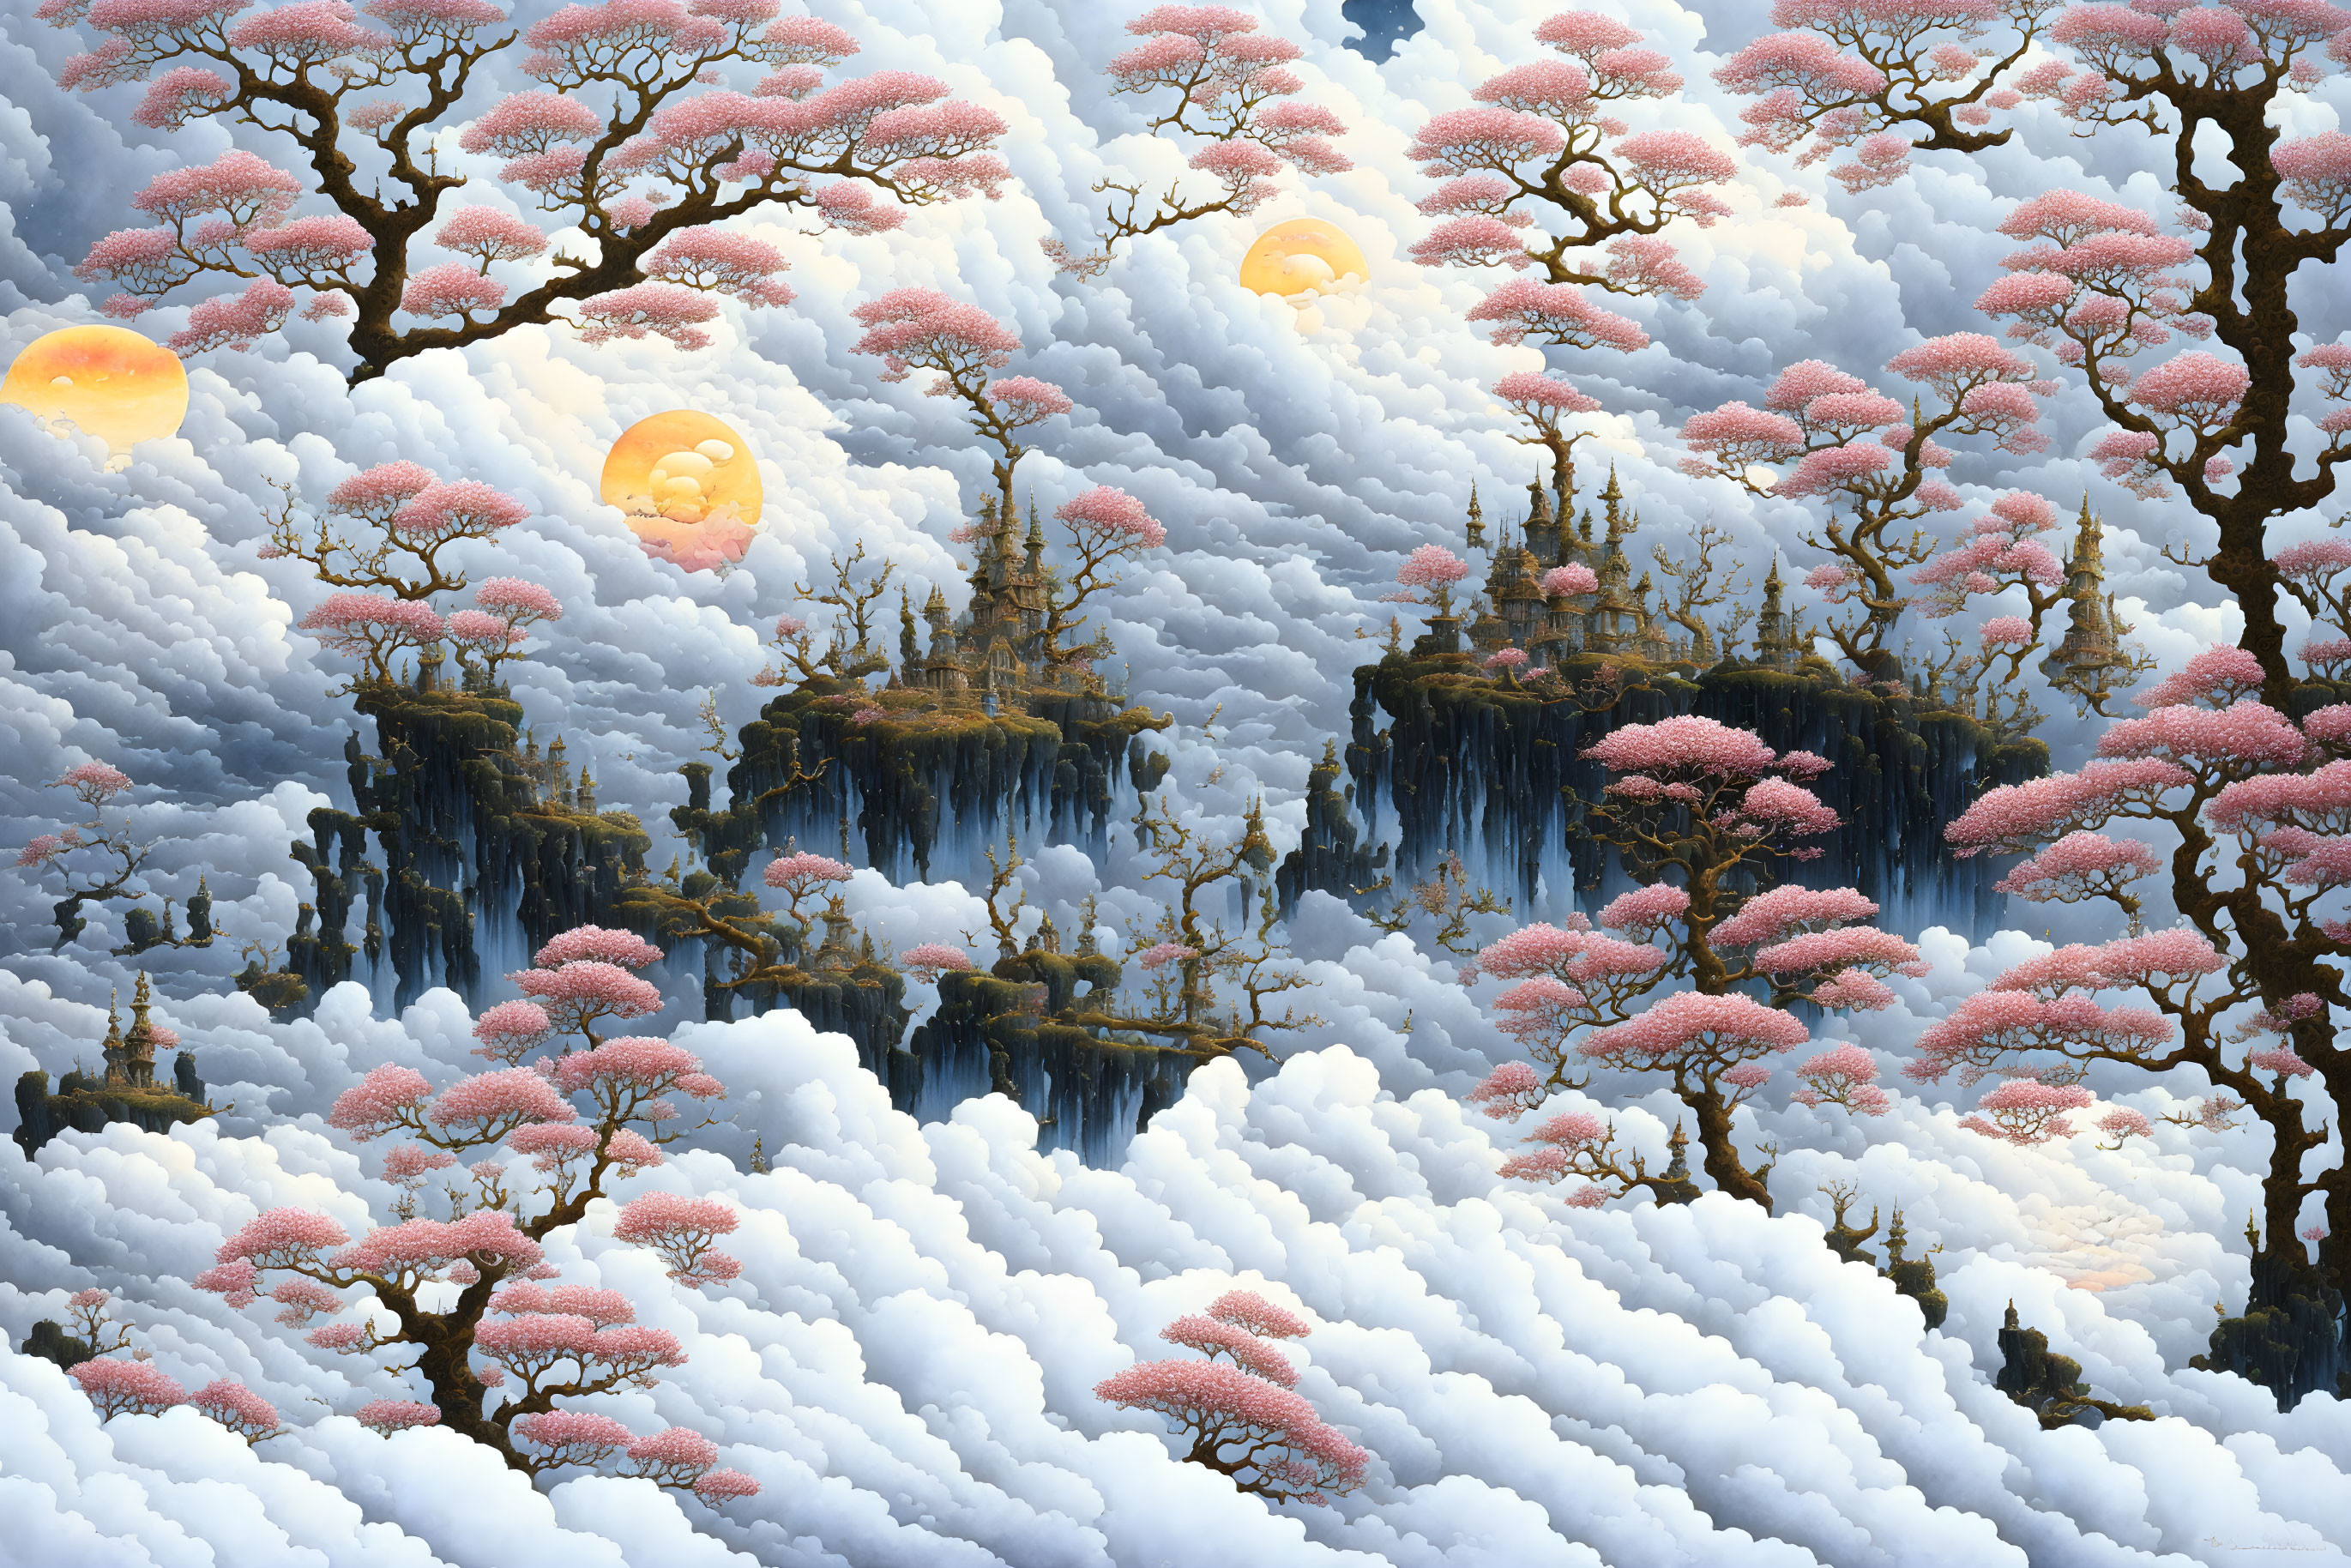 Fantastical landscape with pink trees, floating islands, and glowing orbs